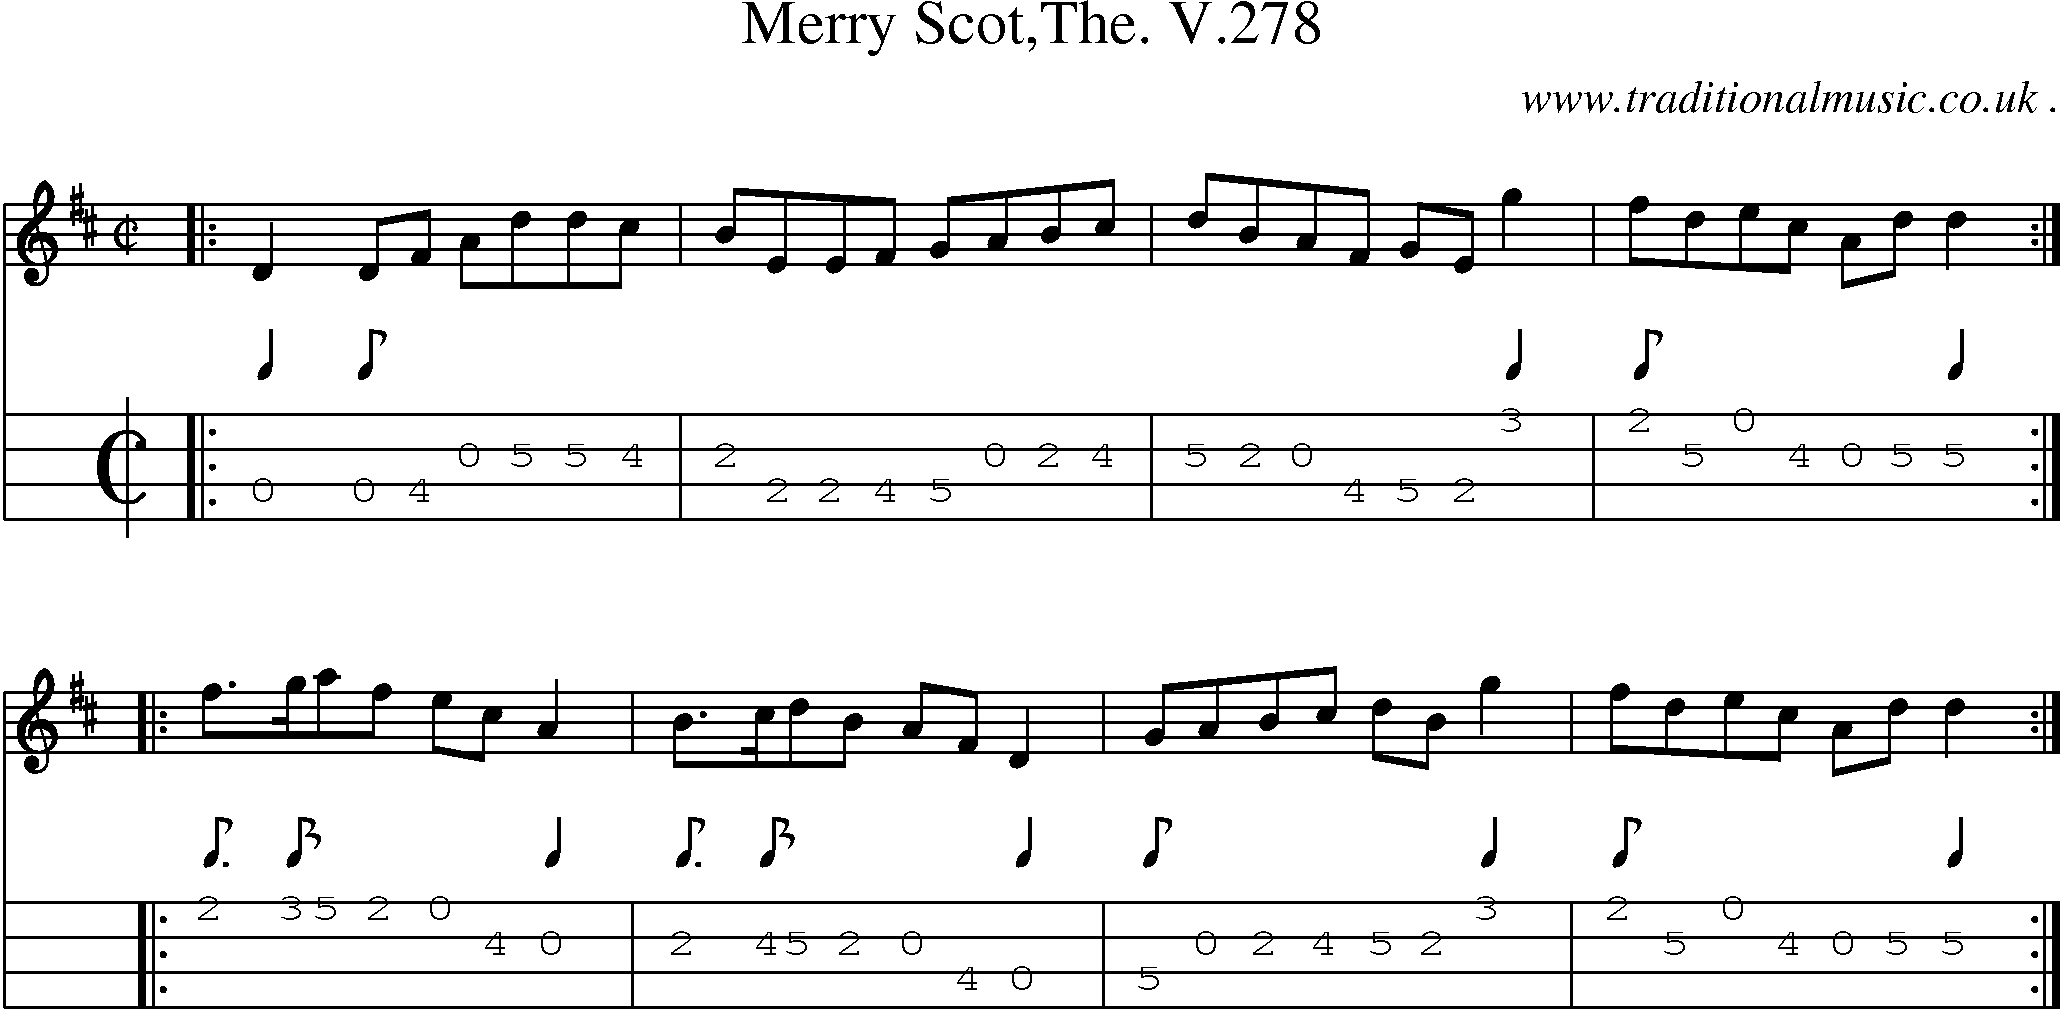 Sheet-music  score, Chords and Mandolin Tabs for Merry Scotthe V278